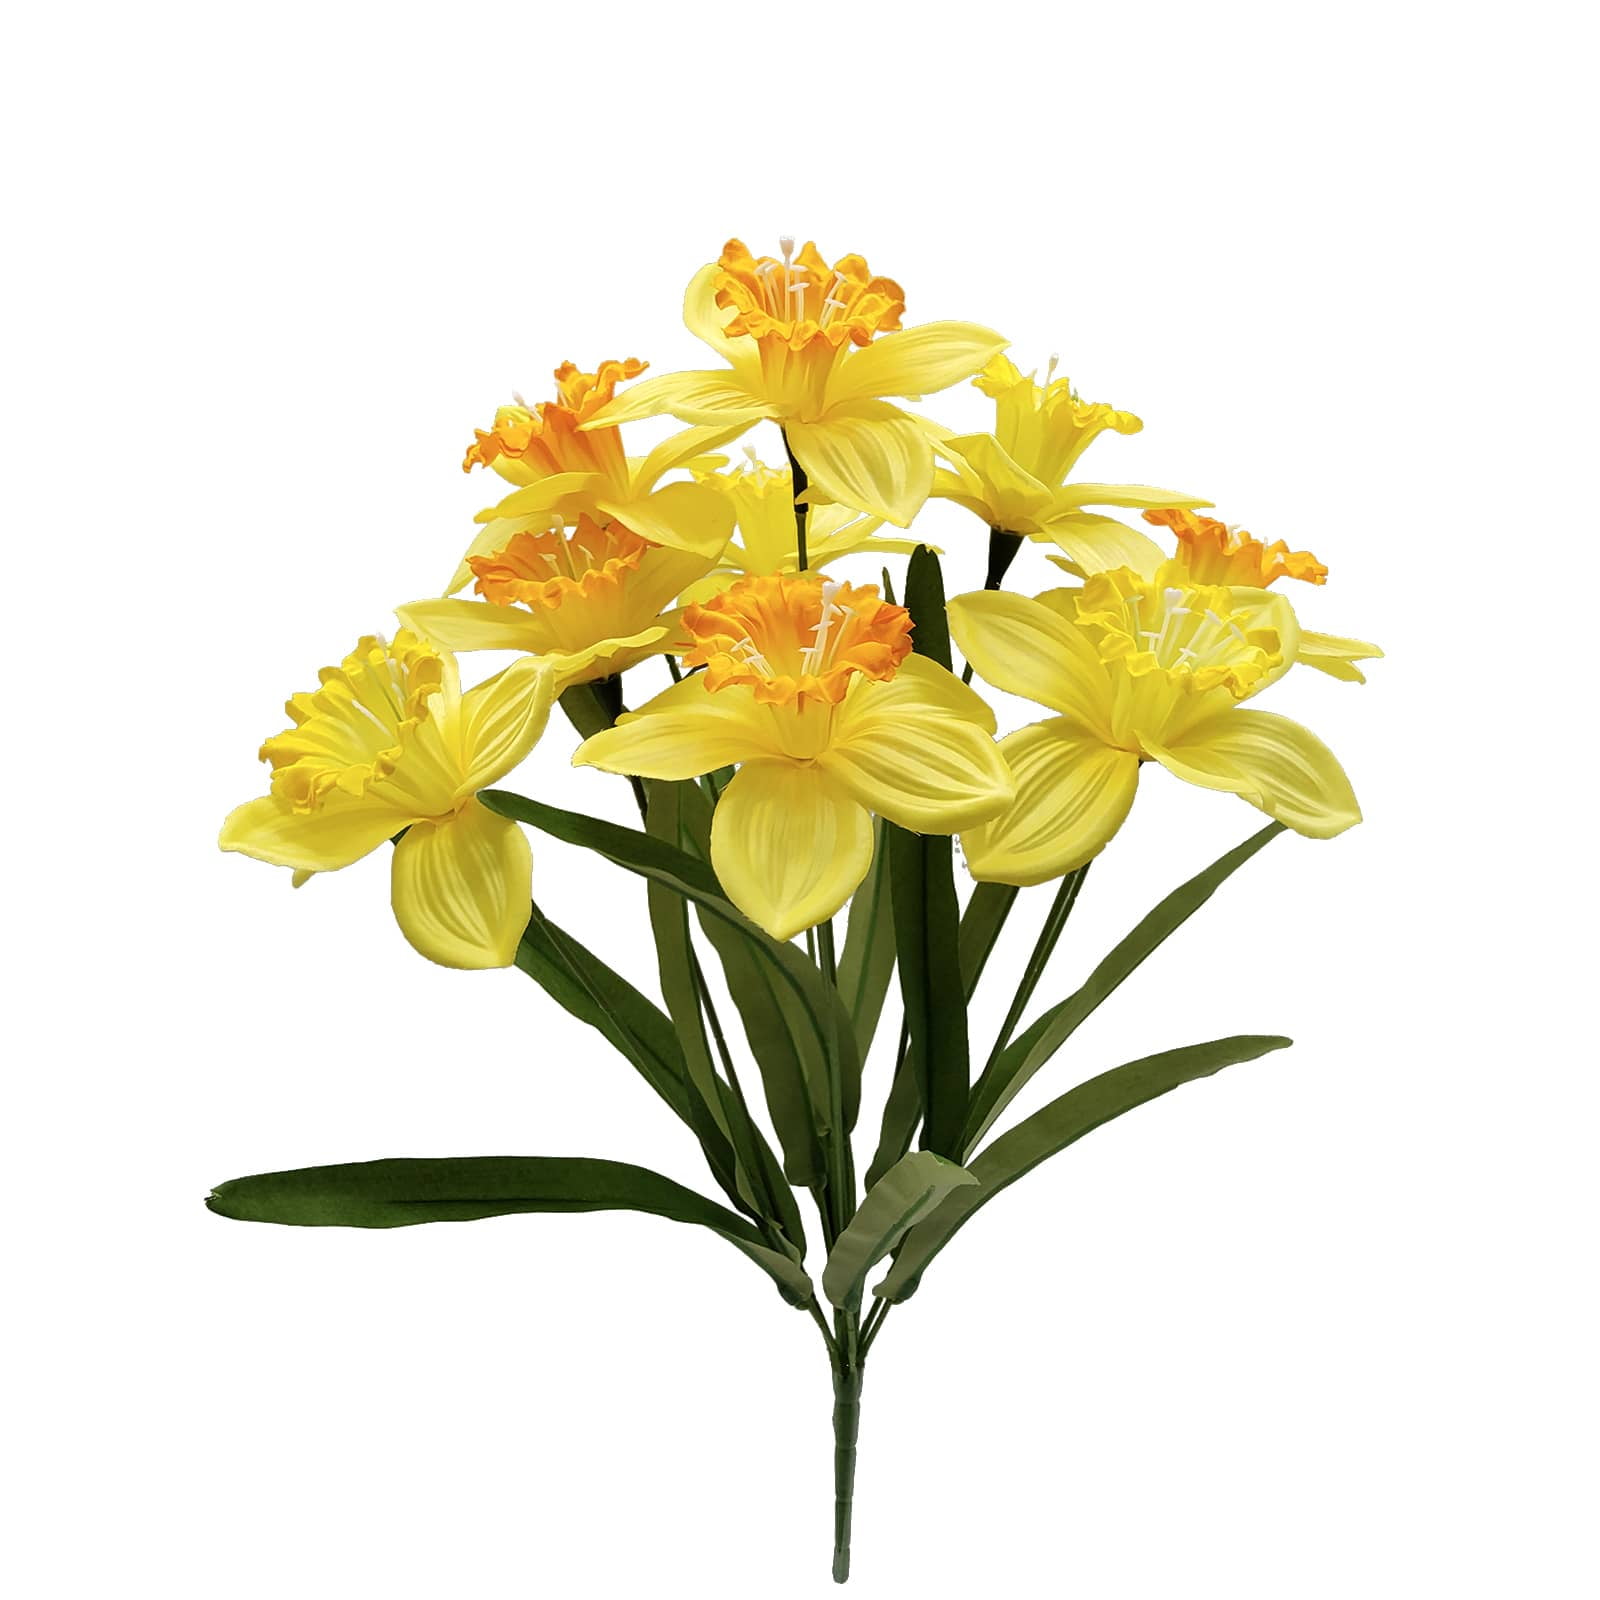 Mainstays 20" Artificial Floral Bush, Daffodil Flower, Yellow Color